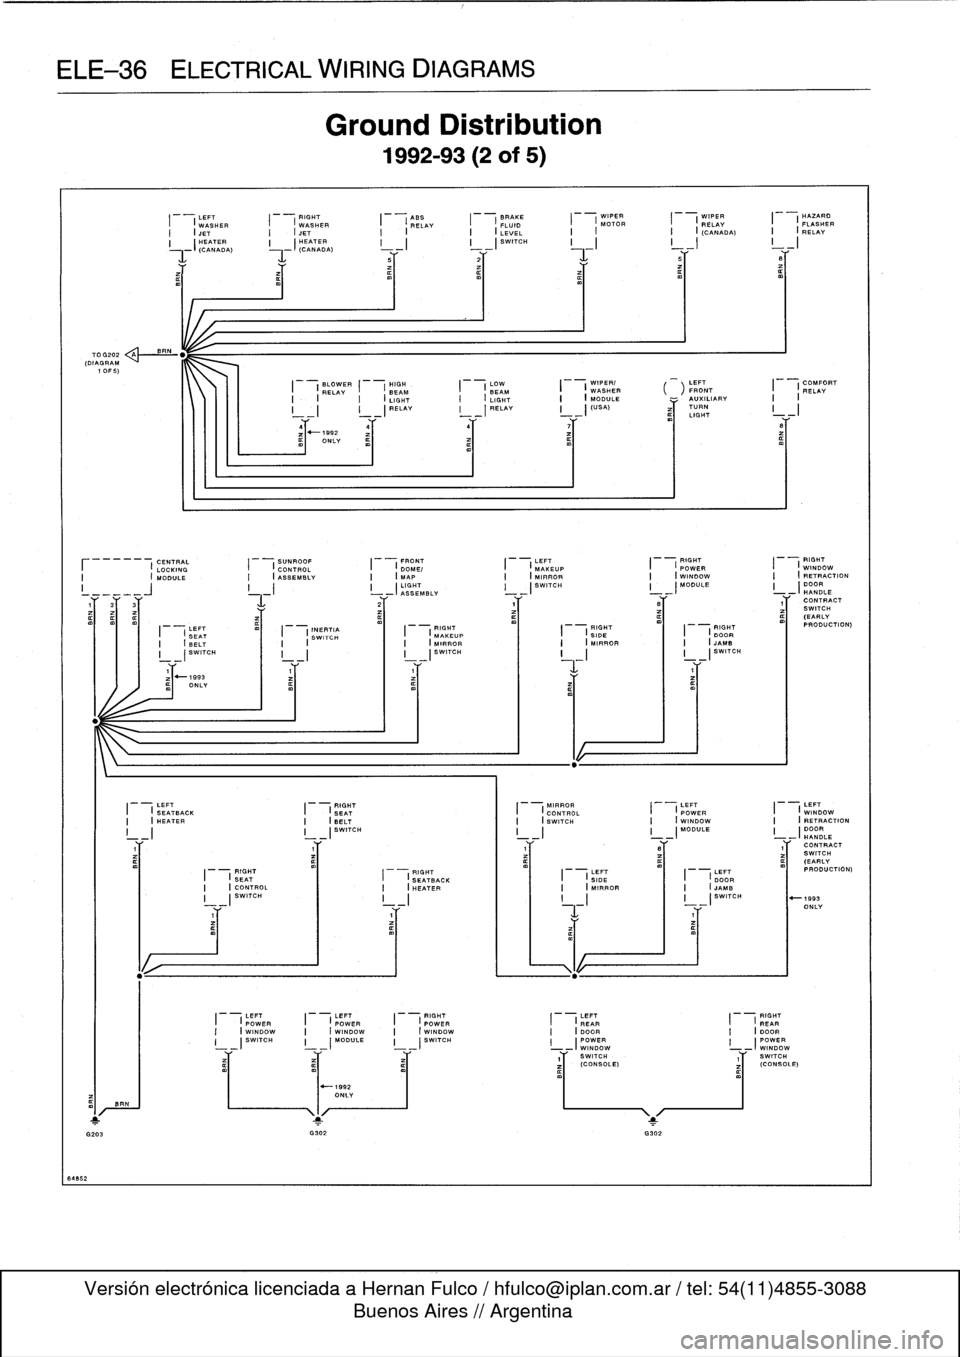 BMW 323i 1993 E36 User Guide 
ELE-36
ELECTRICAL
WIRING
DIAGRAMS

64852

70G202
(DIAGRAM
1
OF
5)

BR

BRN

LEFT

	

RIGHT

	

ASS

	

BRAKE

	

WIPER

	

WIPER

	

HAZARD
I

	

(
WASHER

	

I

	

(
WASHER

	

I

	

(
RELAY

	

I

